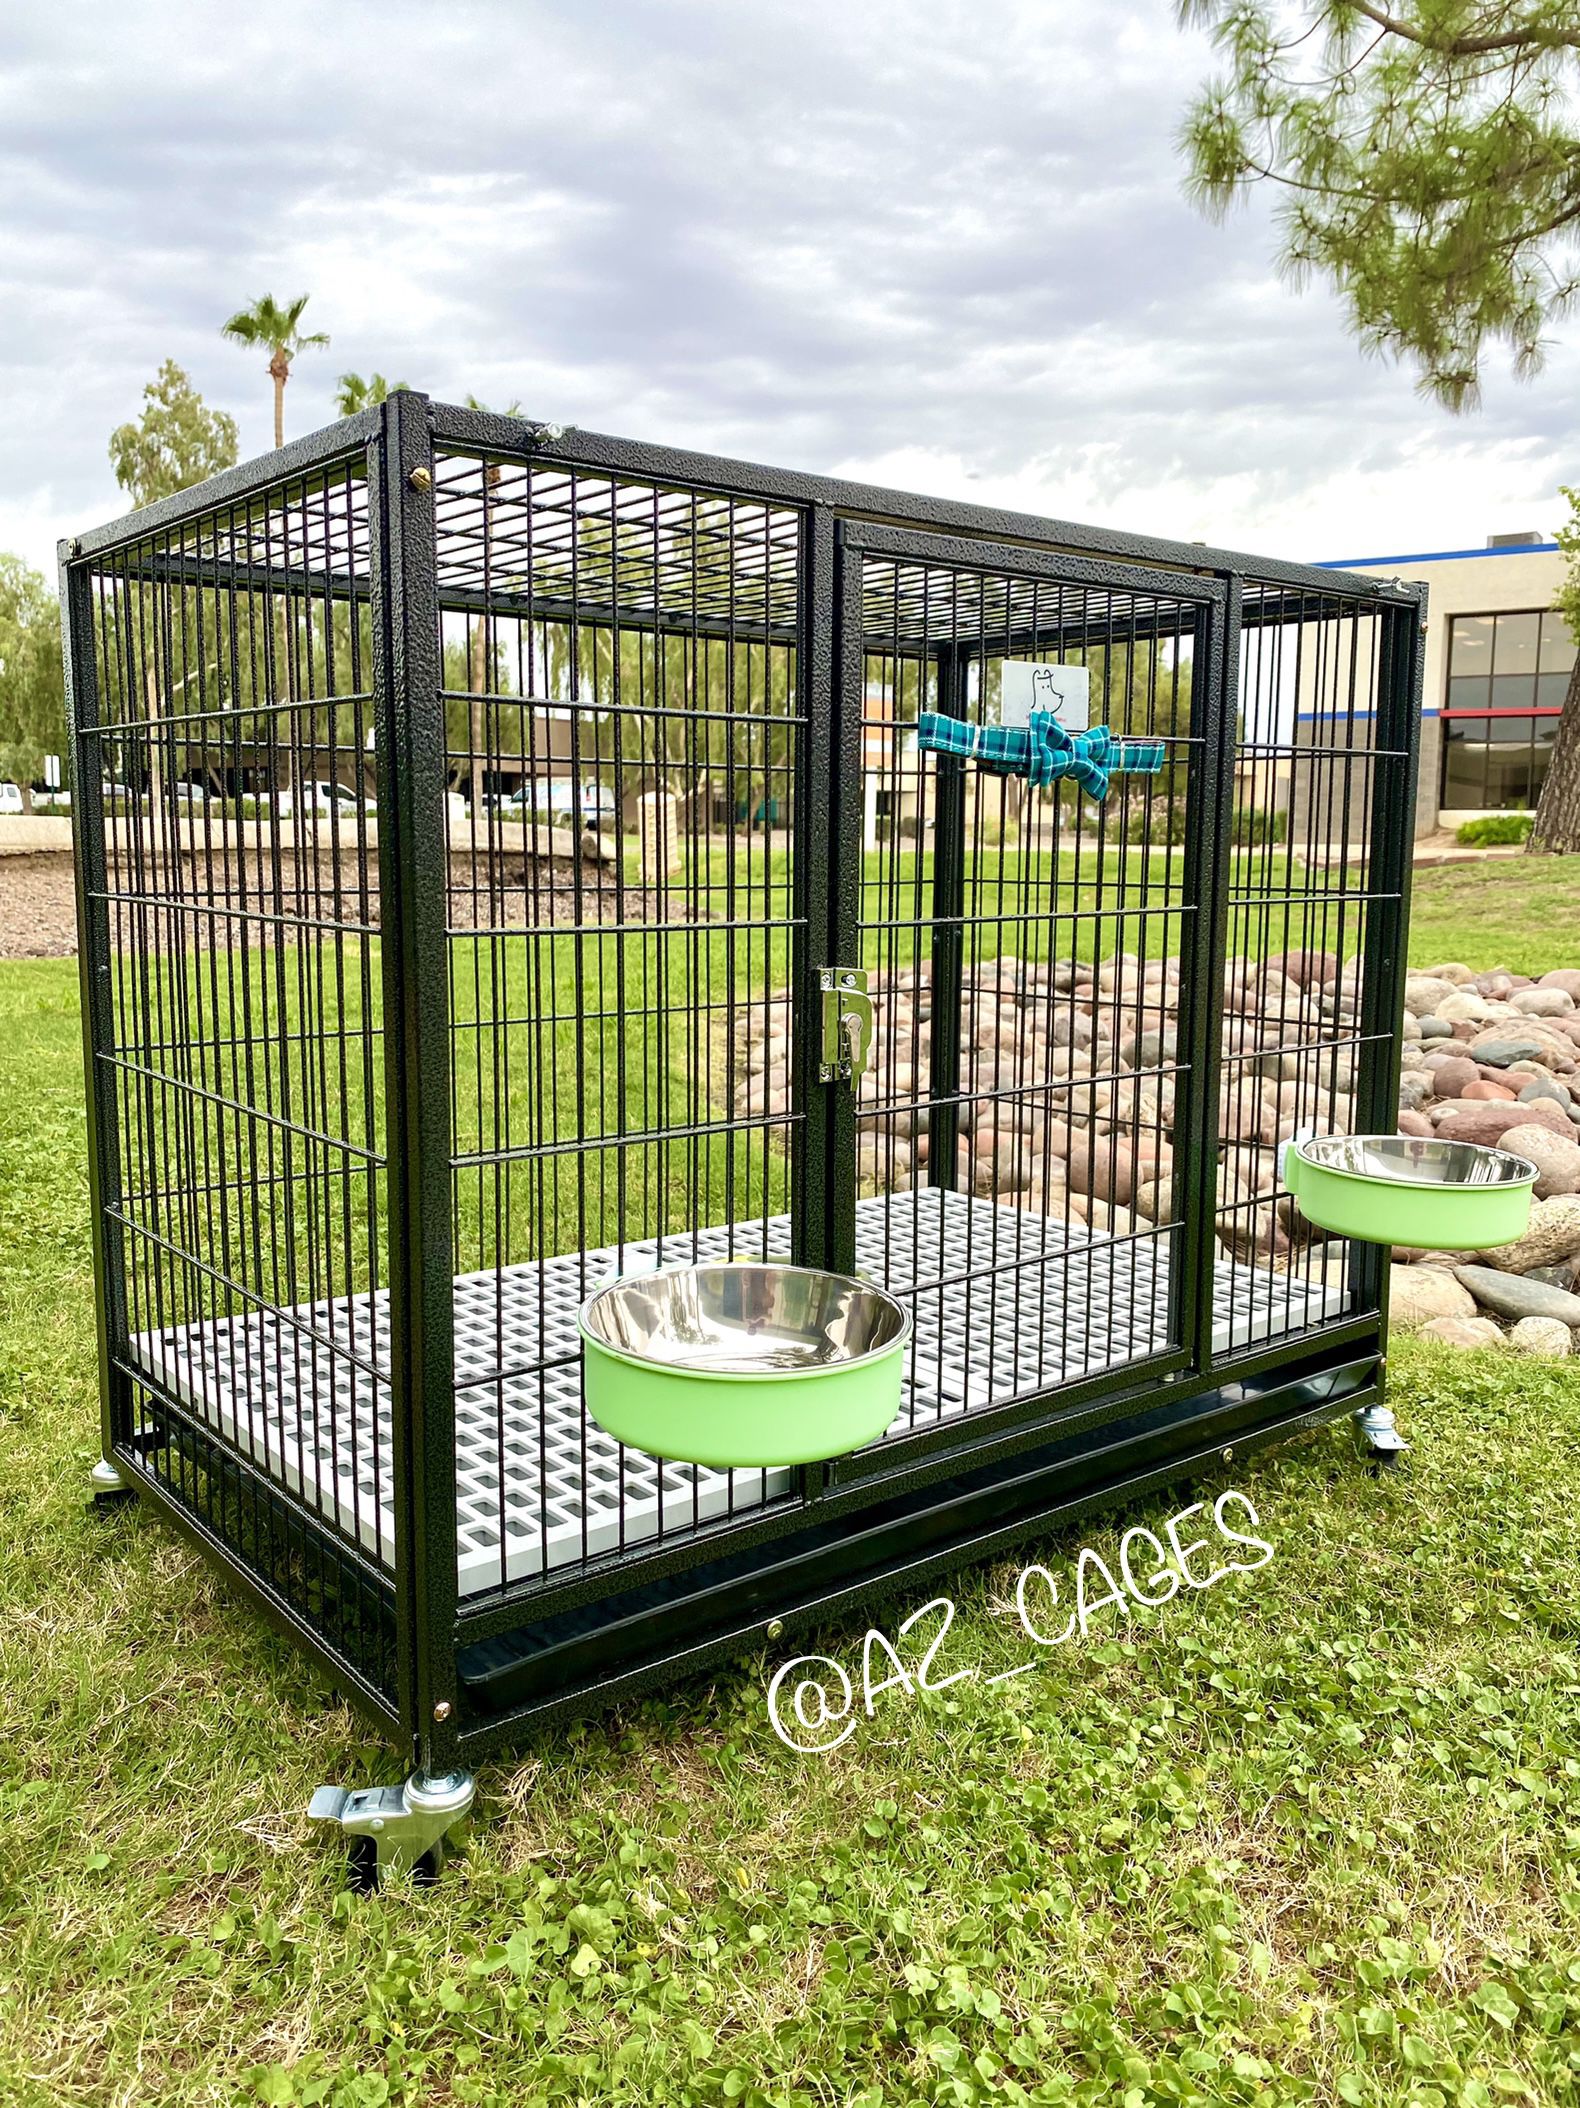 Brand New 37” Heavy Duty Dog Pet Kennel Crate Cage 🐶🐕‍🦺🐩 with Plastic Floor 🐾💟🐶 please see dimensions in second picture 🇺🇸 